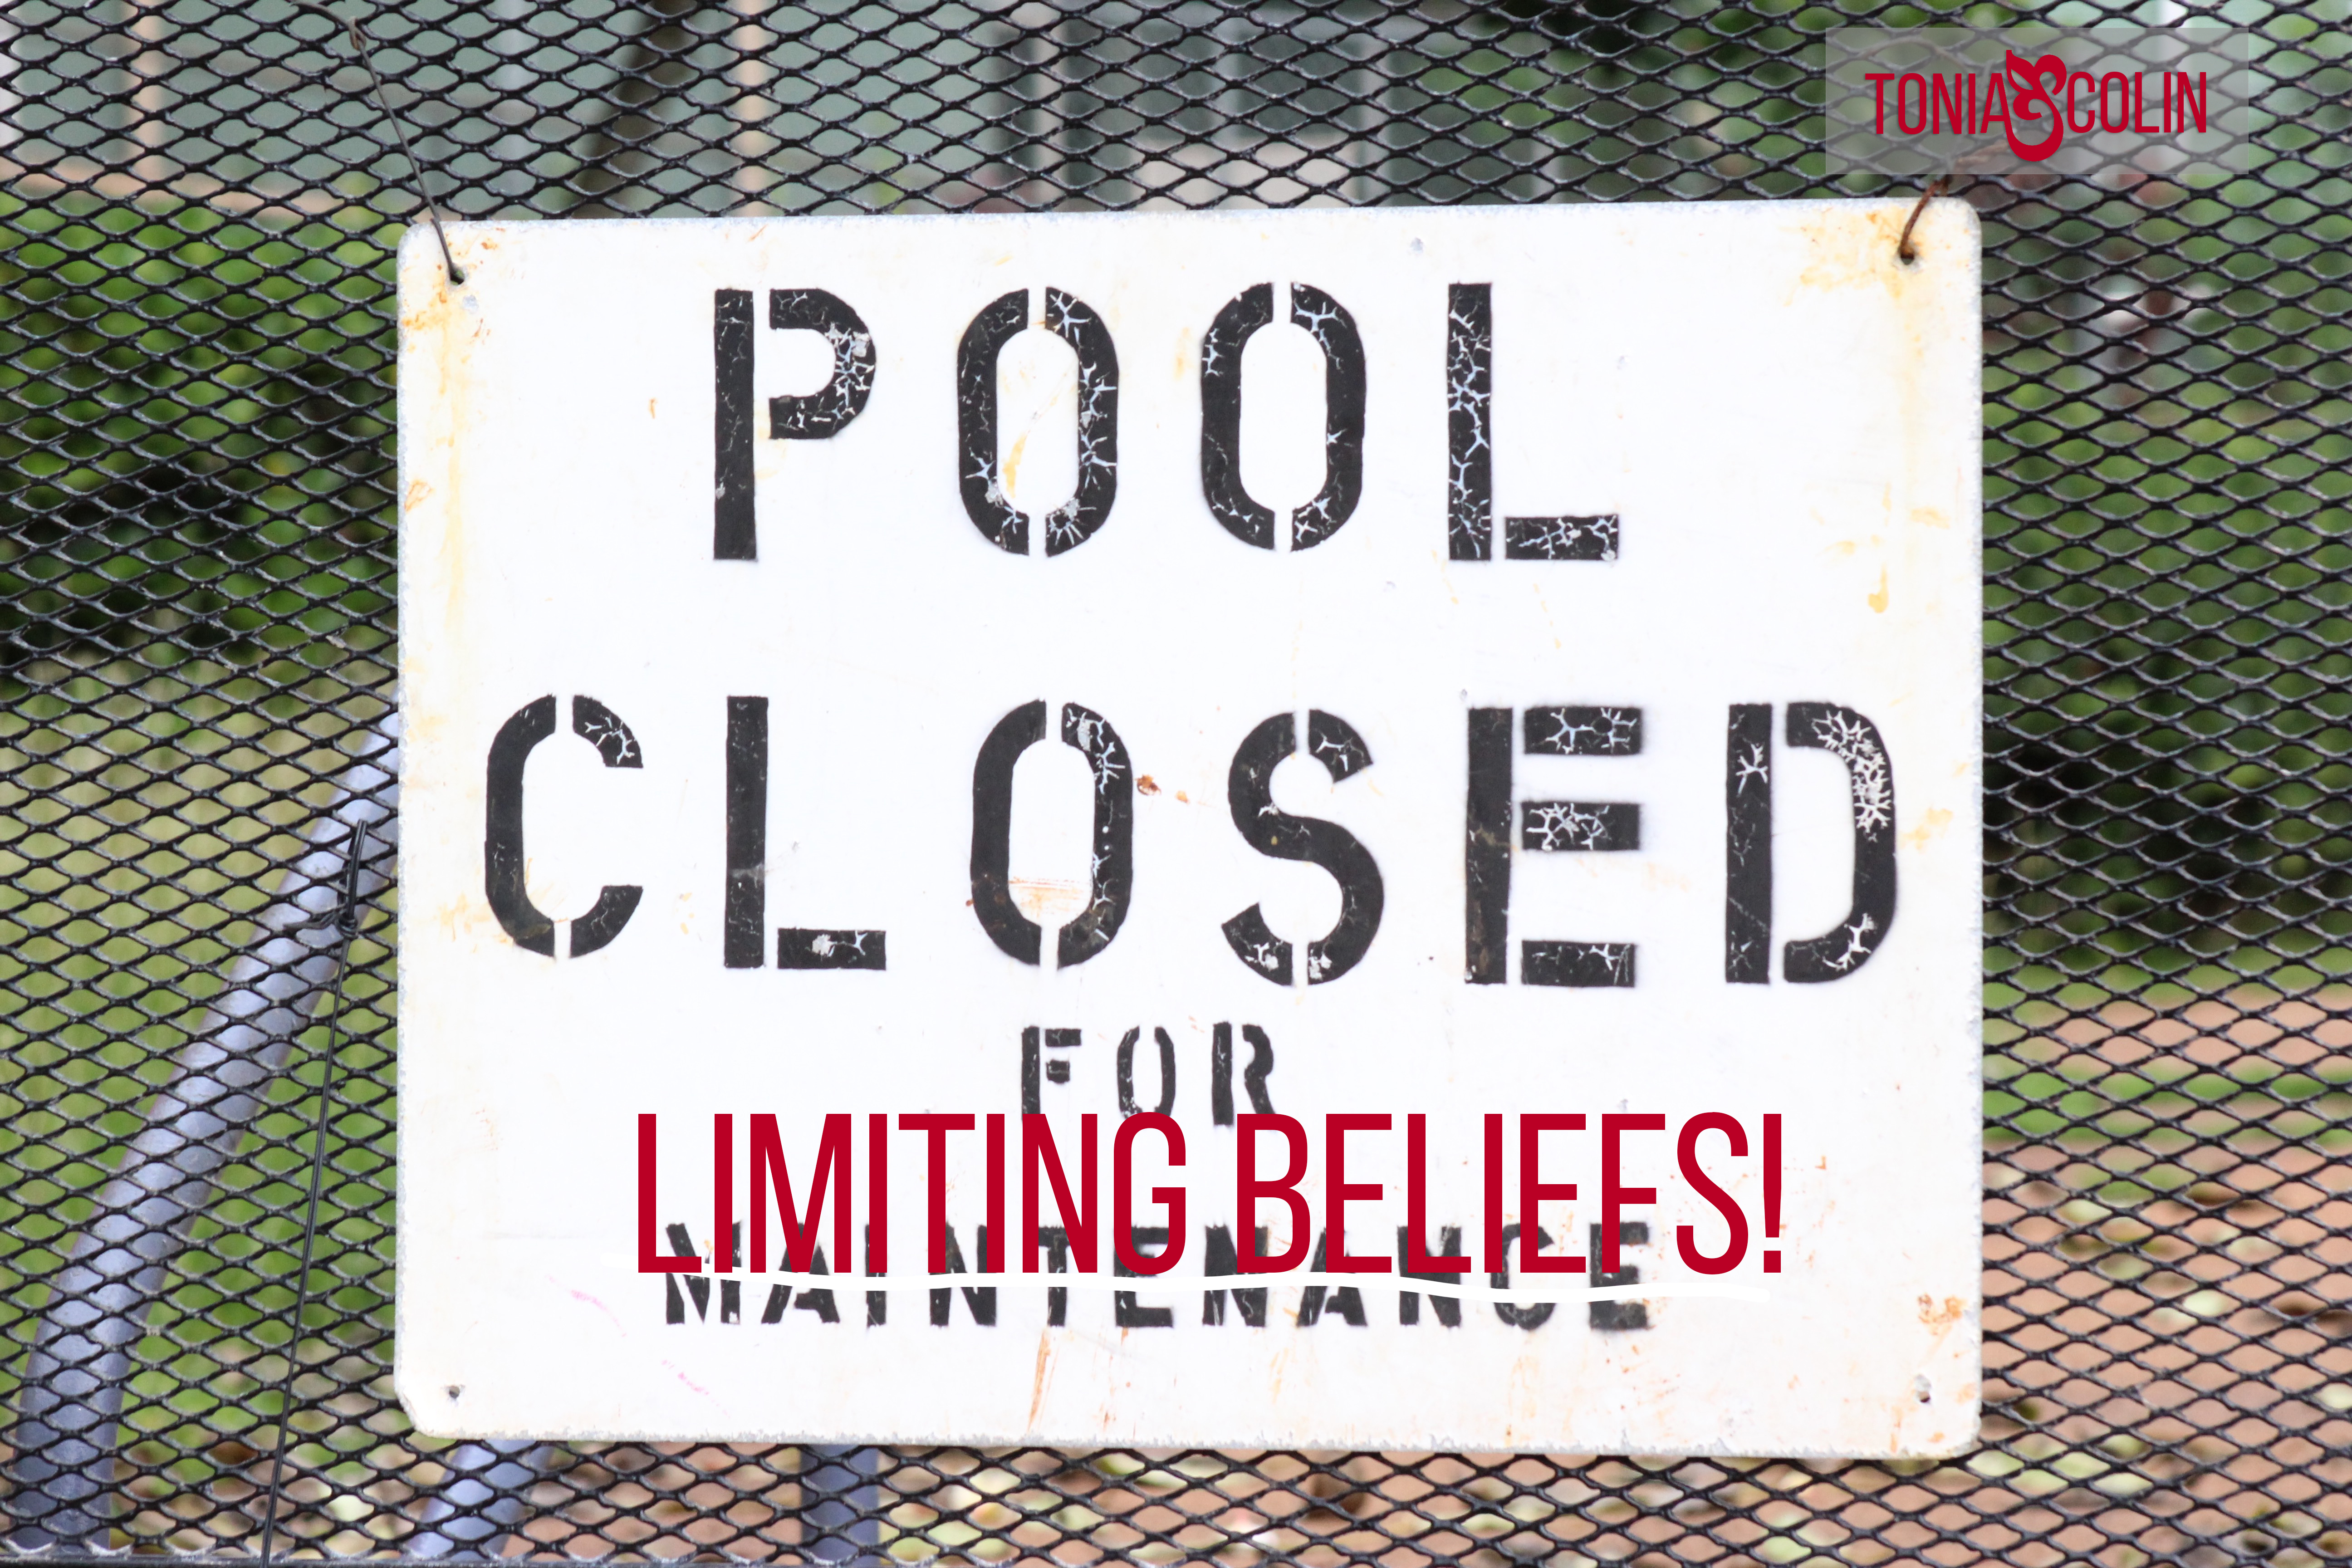 the-pool-is-closed-for-limiting-beliefs.jpg